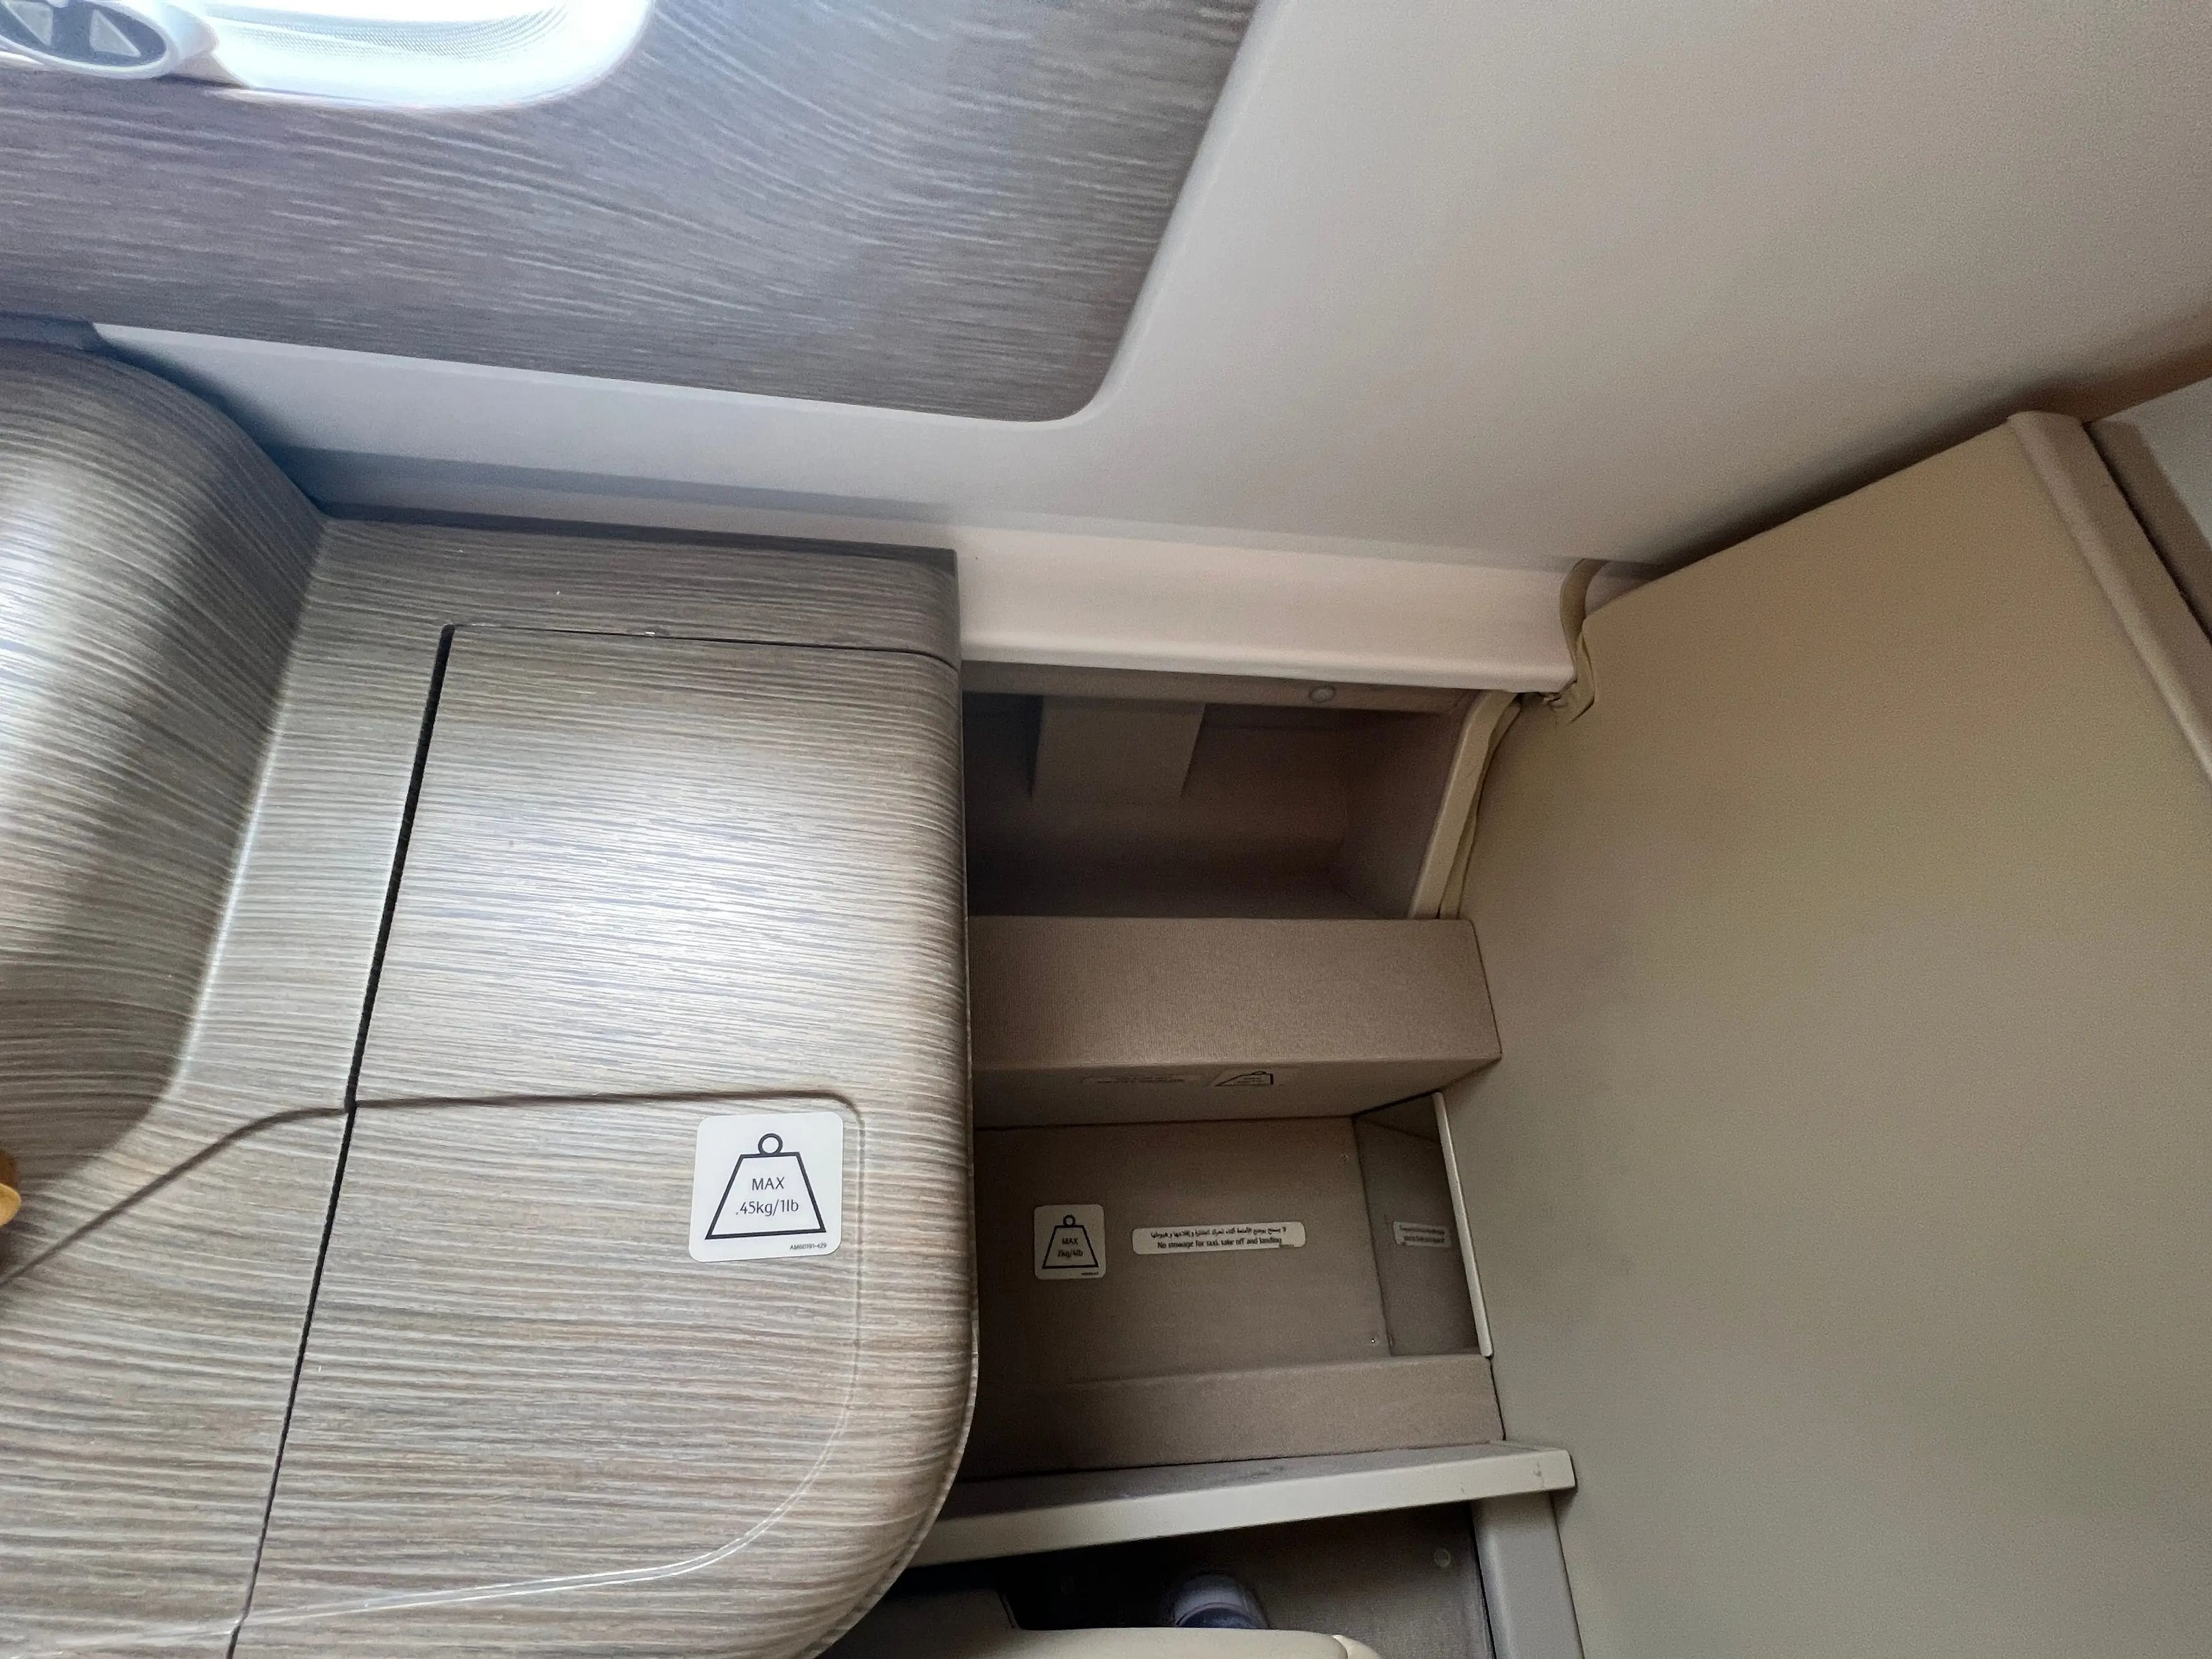 Stowage space in the back corner of an Emirates A380 first class suite